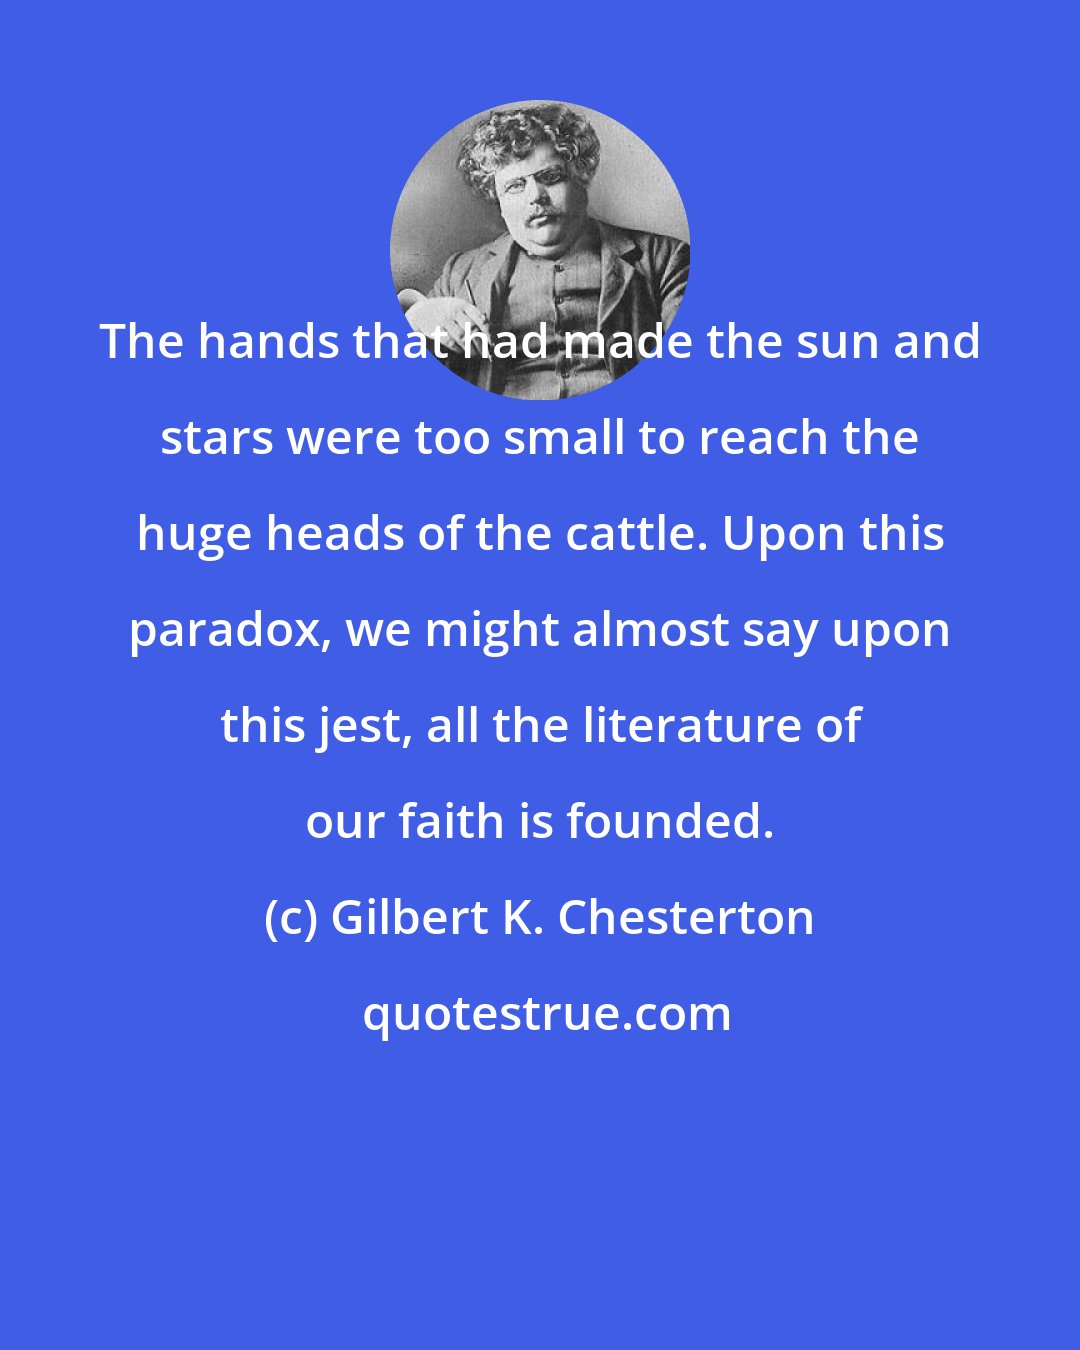 Gilbert K. Chesterton: The hands that had made the sun and stars were too small to reach the huge heads of the cattle. Upon this paradox, we might almost say upon this jest, all the literature of our faith is founded.